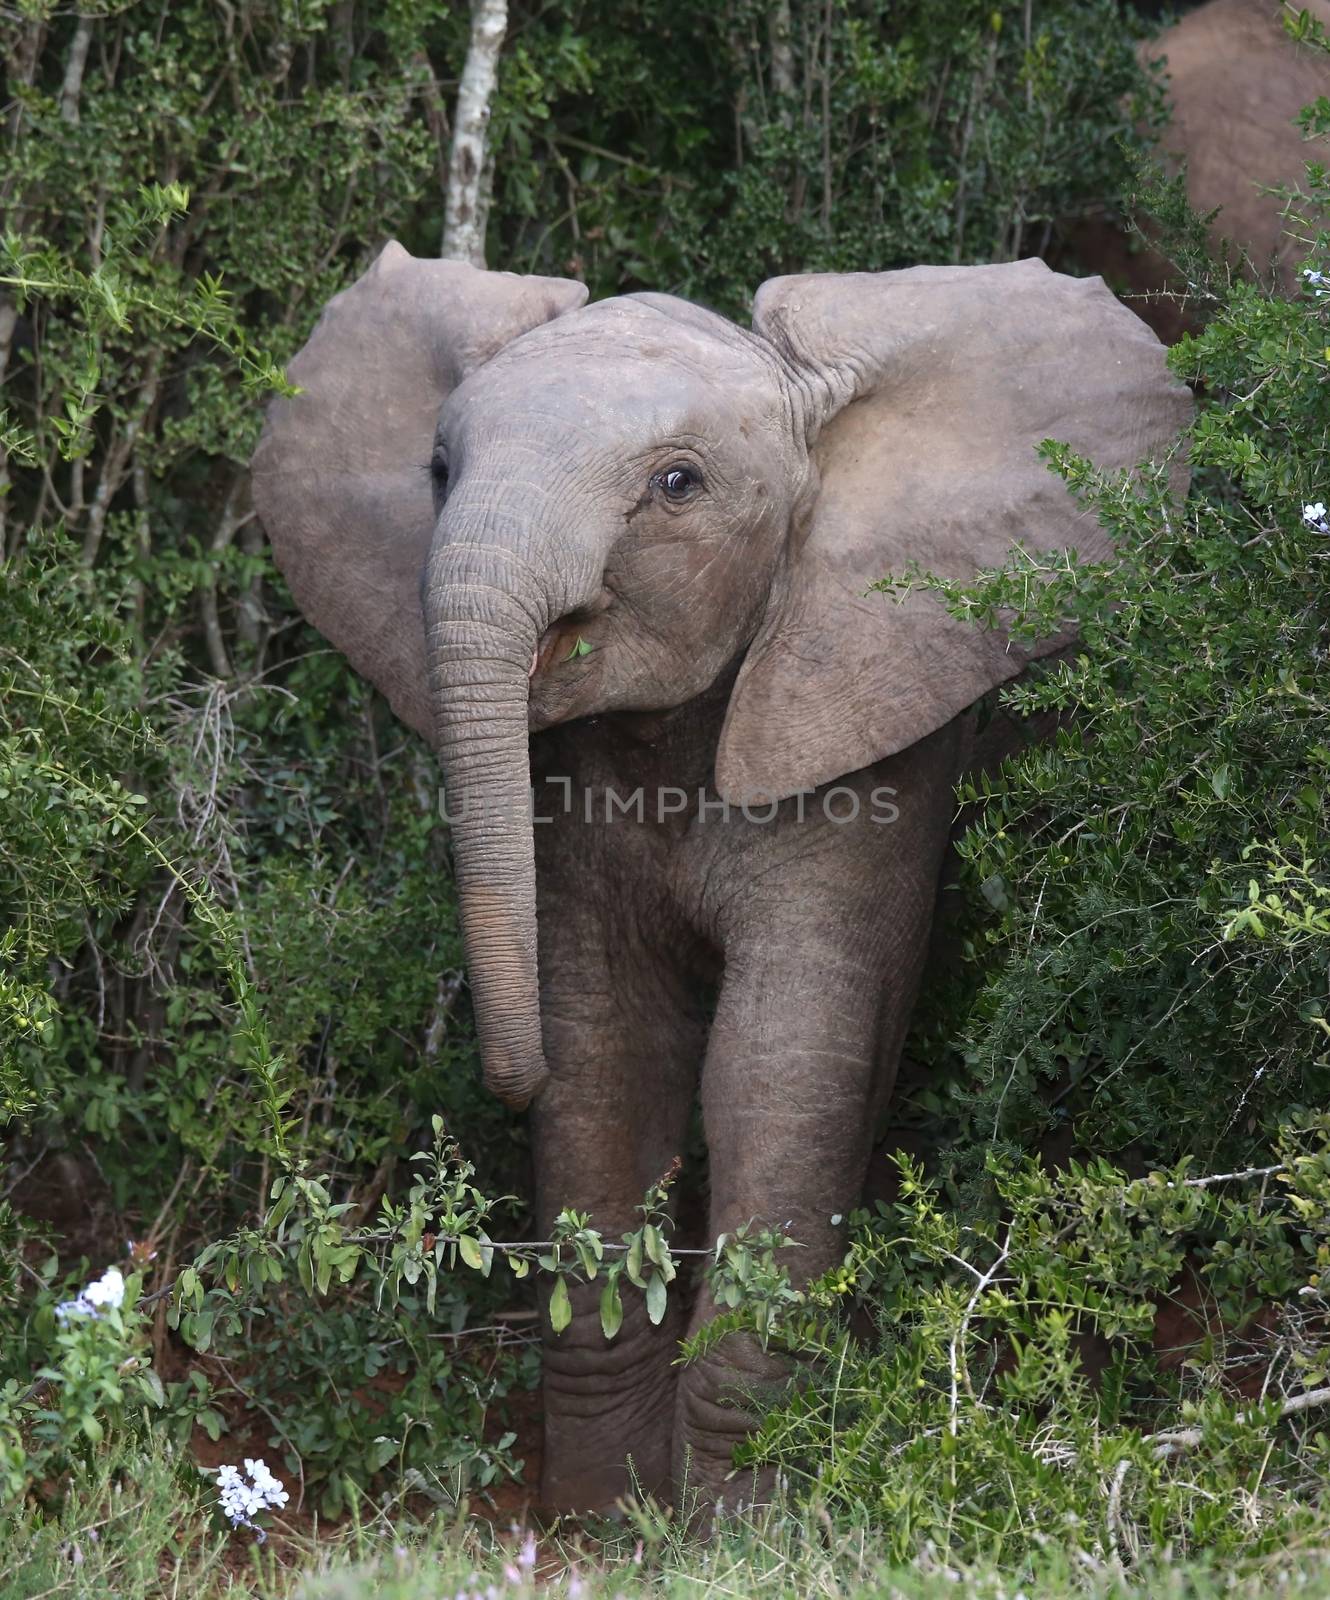 Baby elephant mock chaging out of the African bush